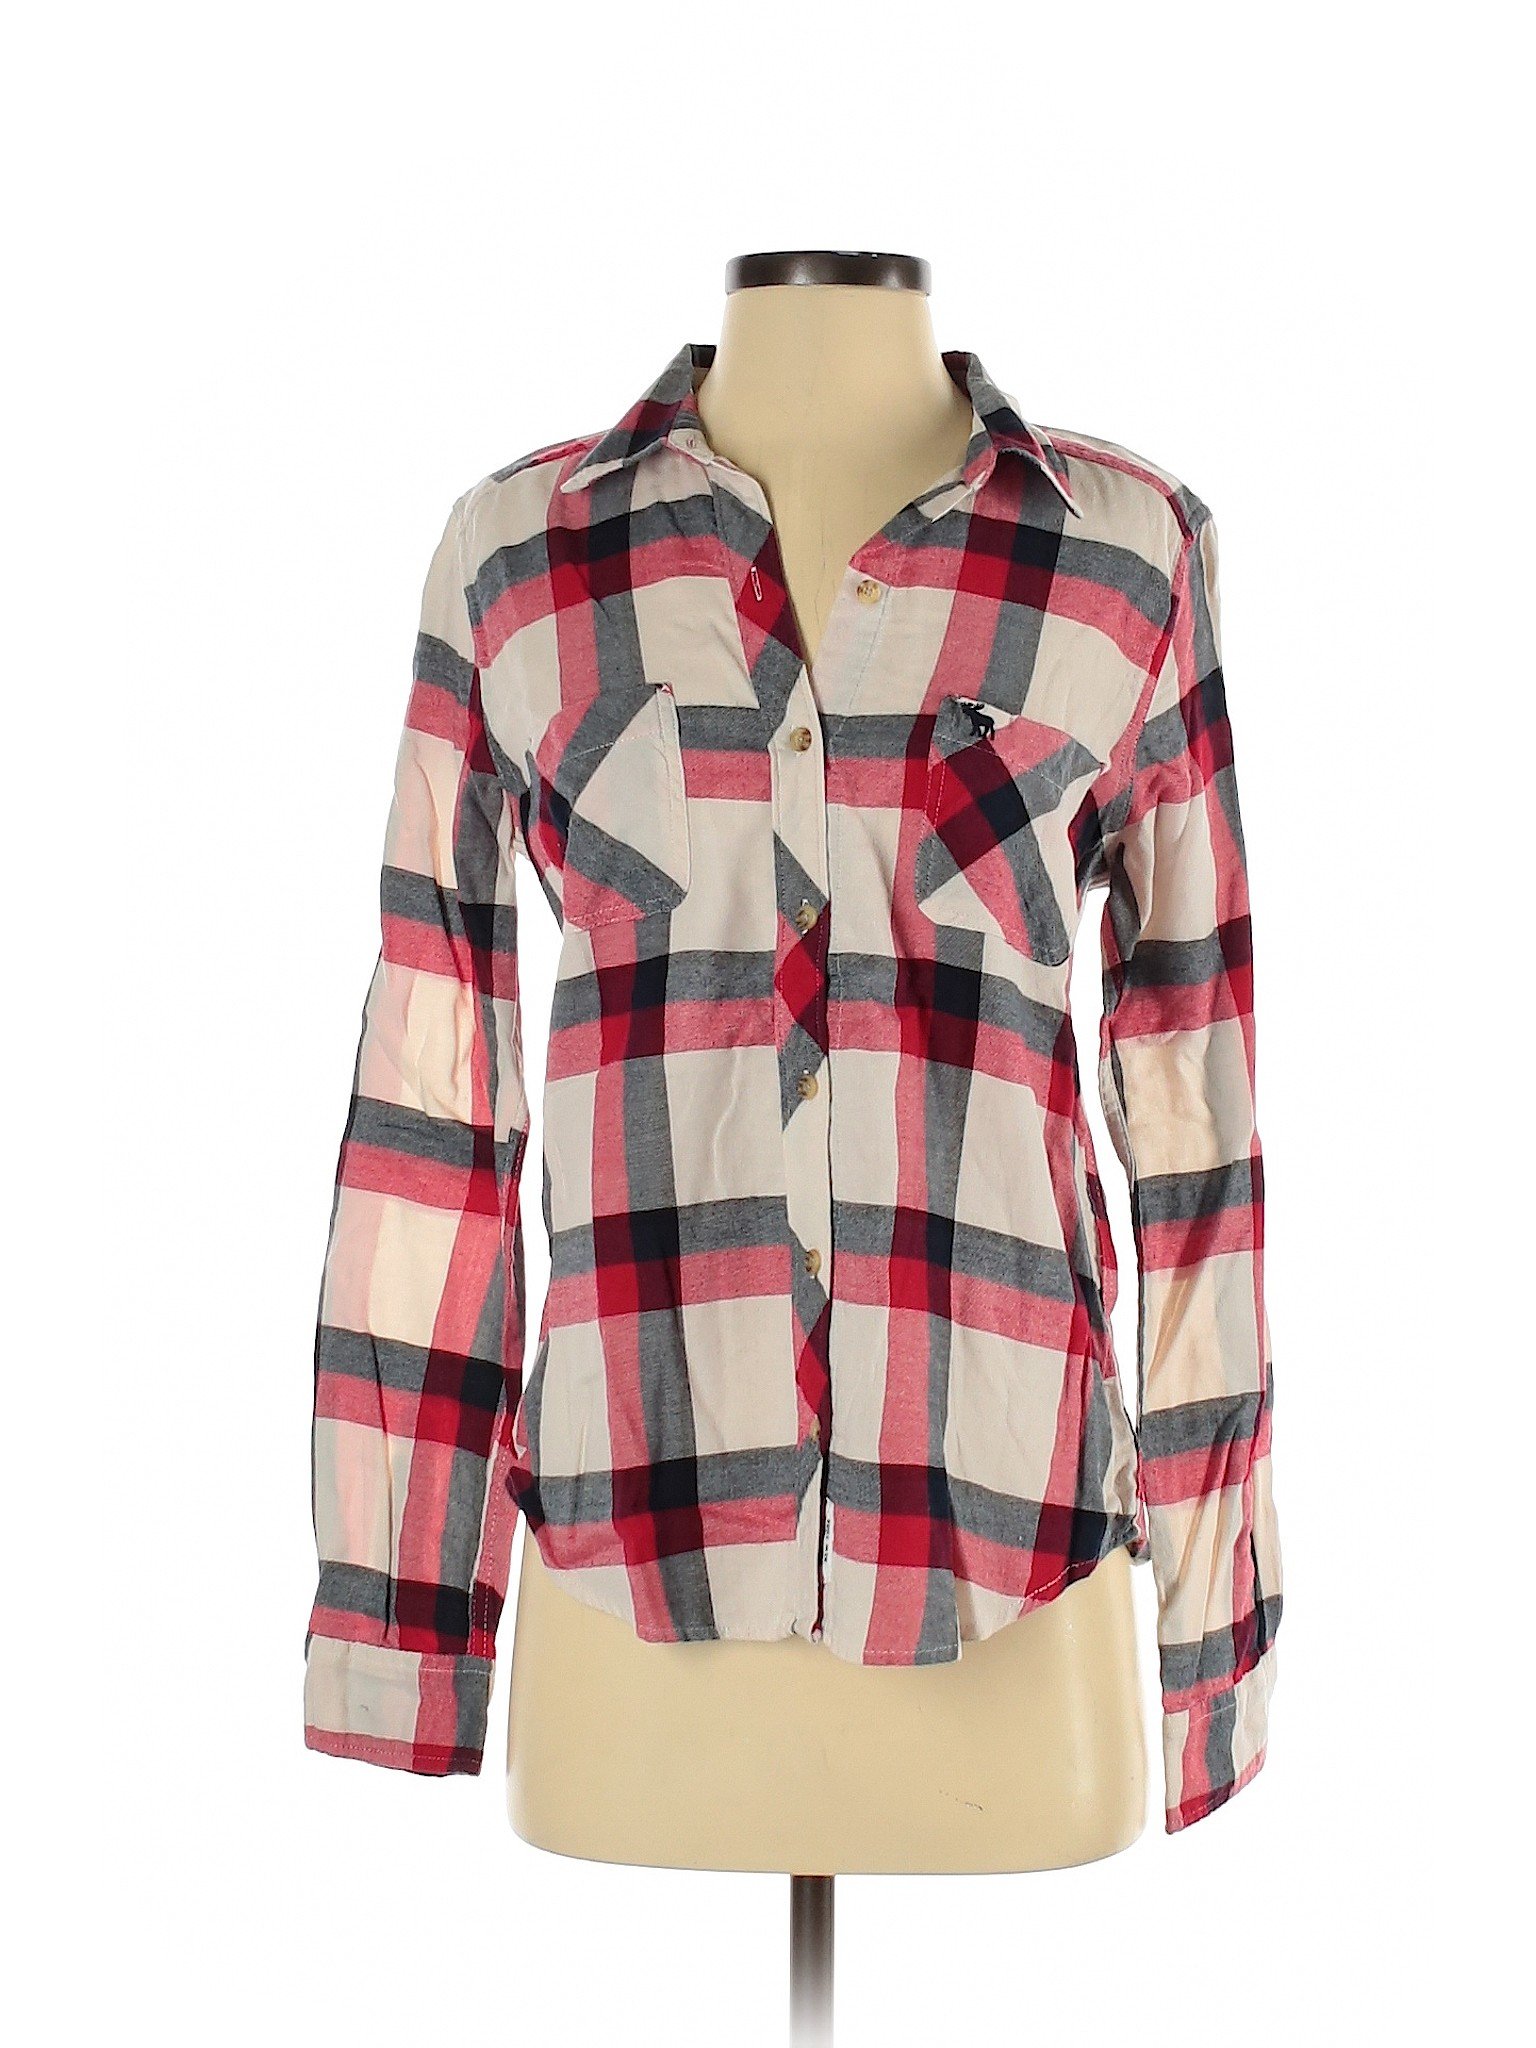 Abercrombie & Fitch Women Red Long Sleeve Button-Down Shirt S | eBay